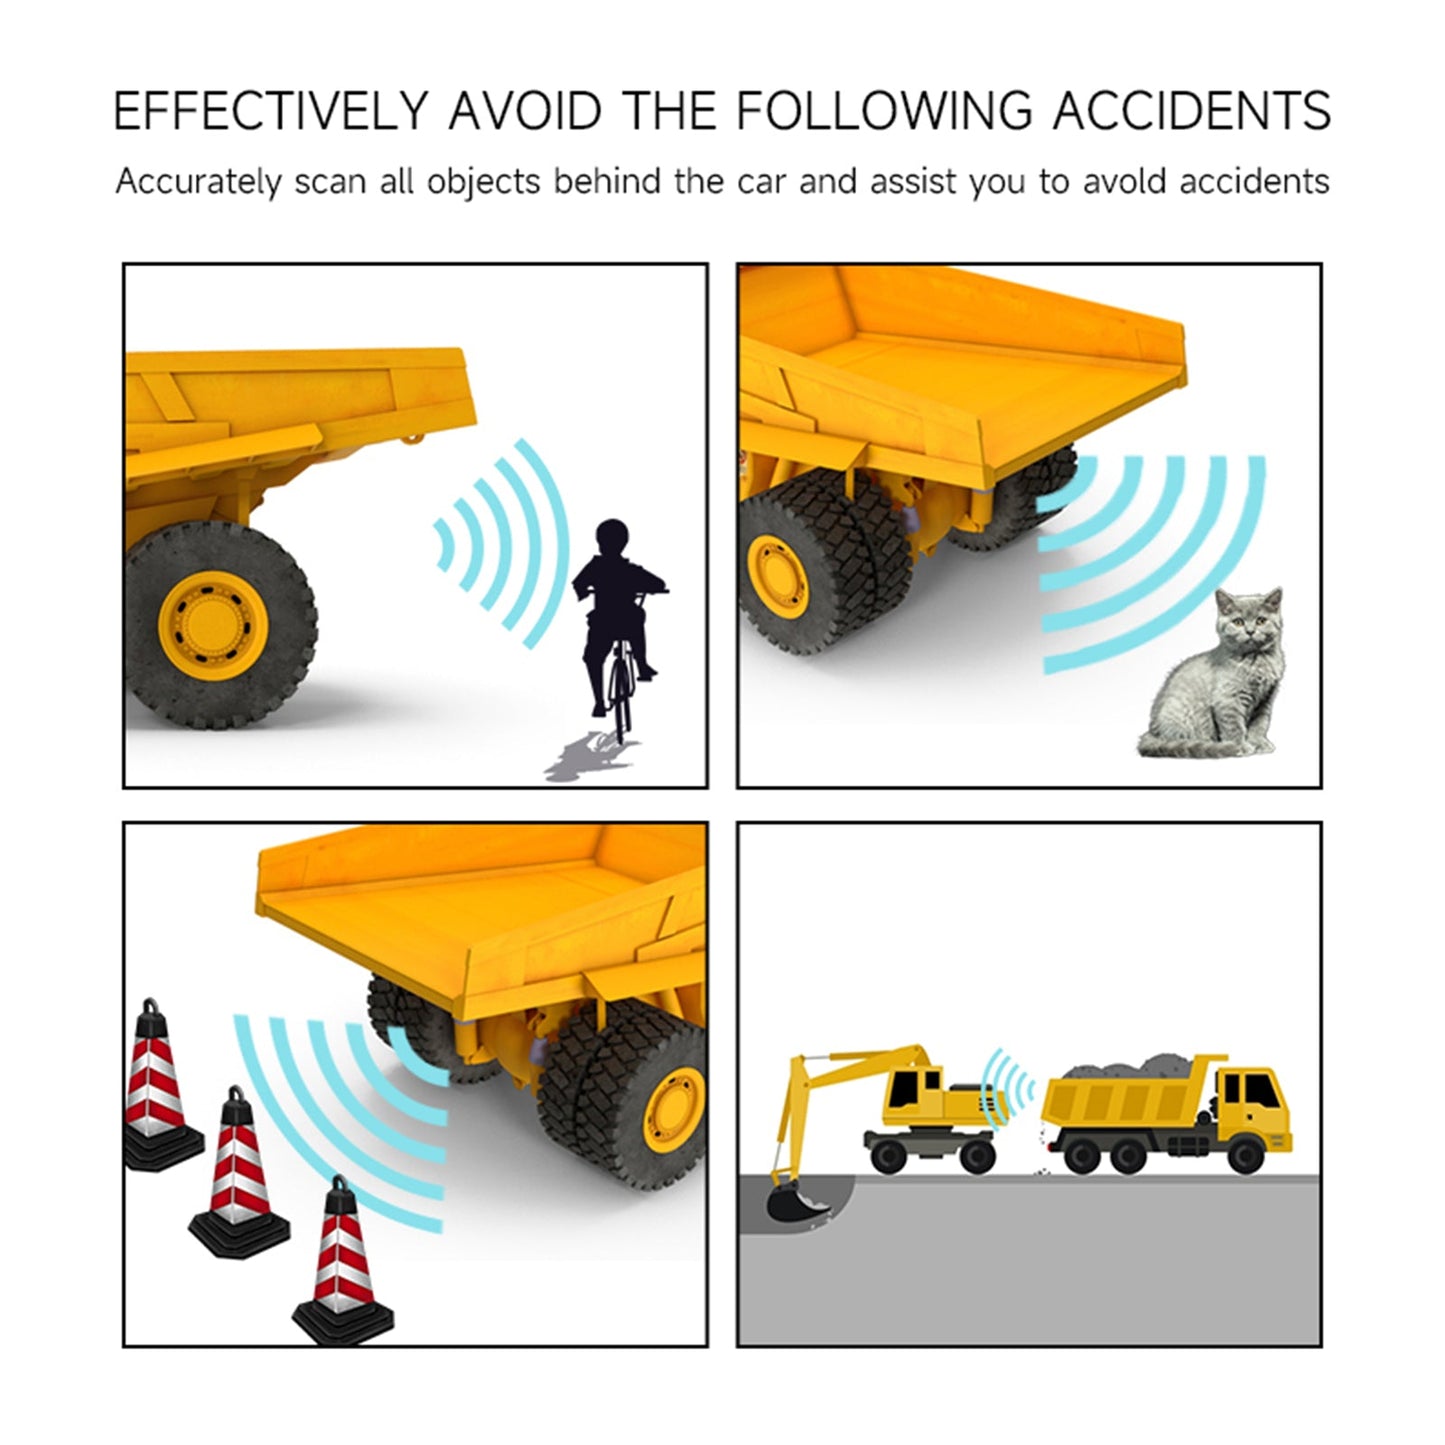 77Ghz Millimeter Wave Radar Obstacle Avoidance Warning System for Cement Truck